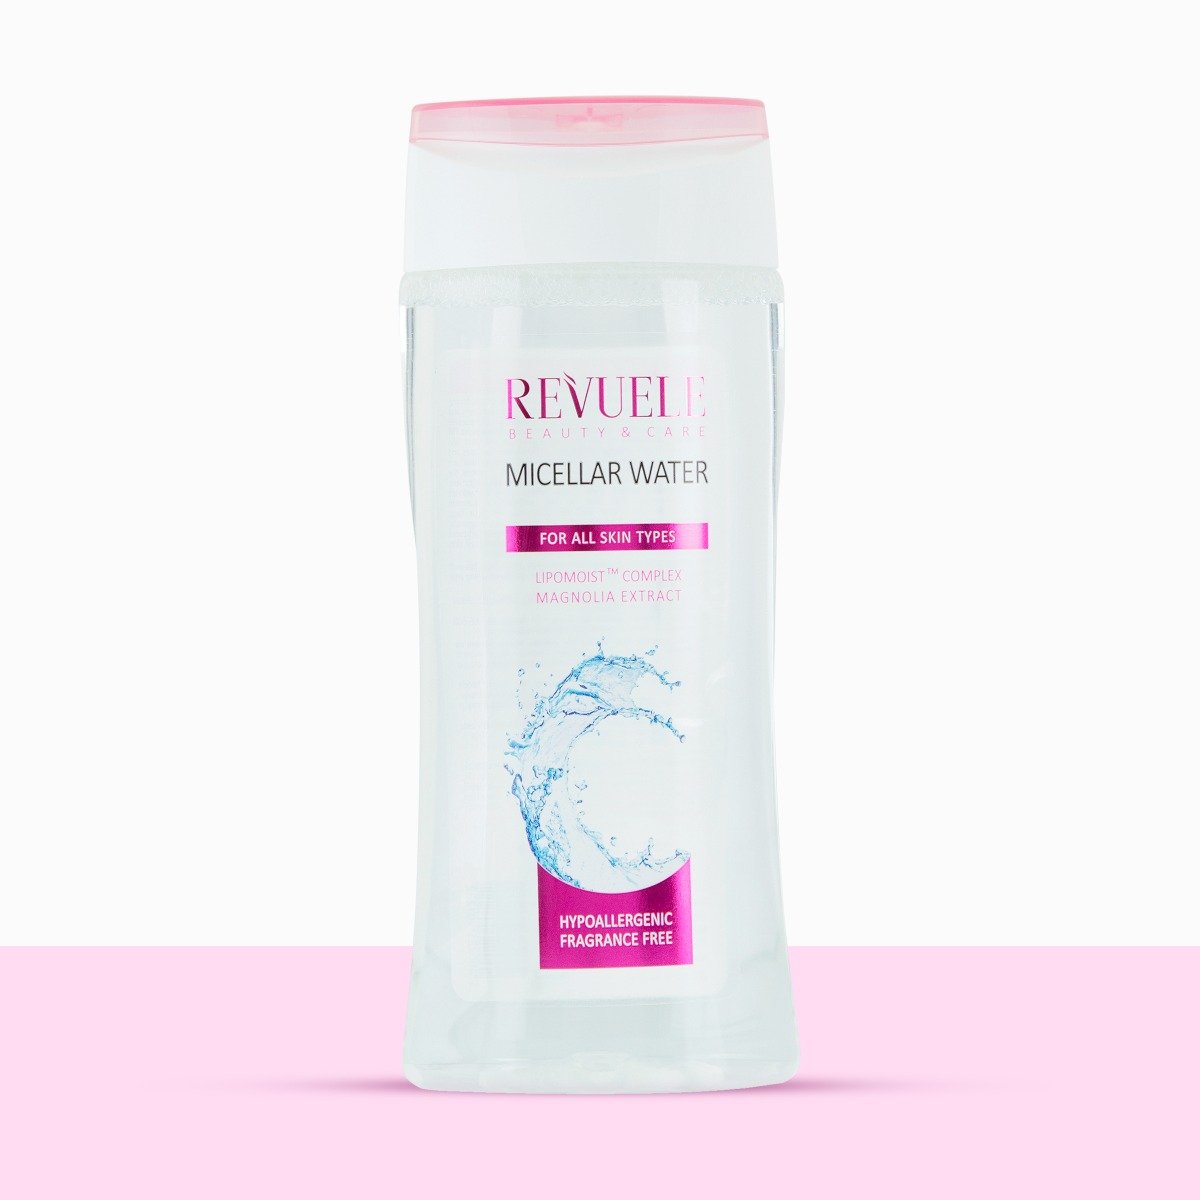 Revuele Micellar Water For All Skin Types With Lipomoist Complex & Magnolia Extract